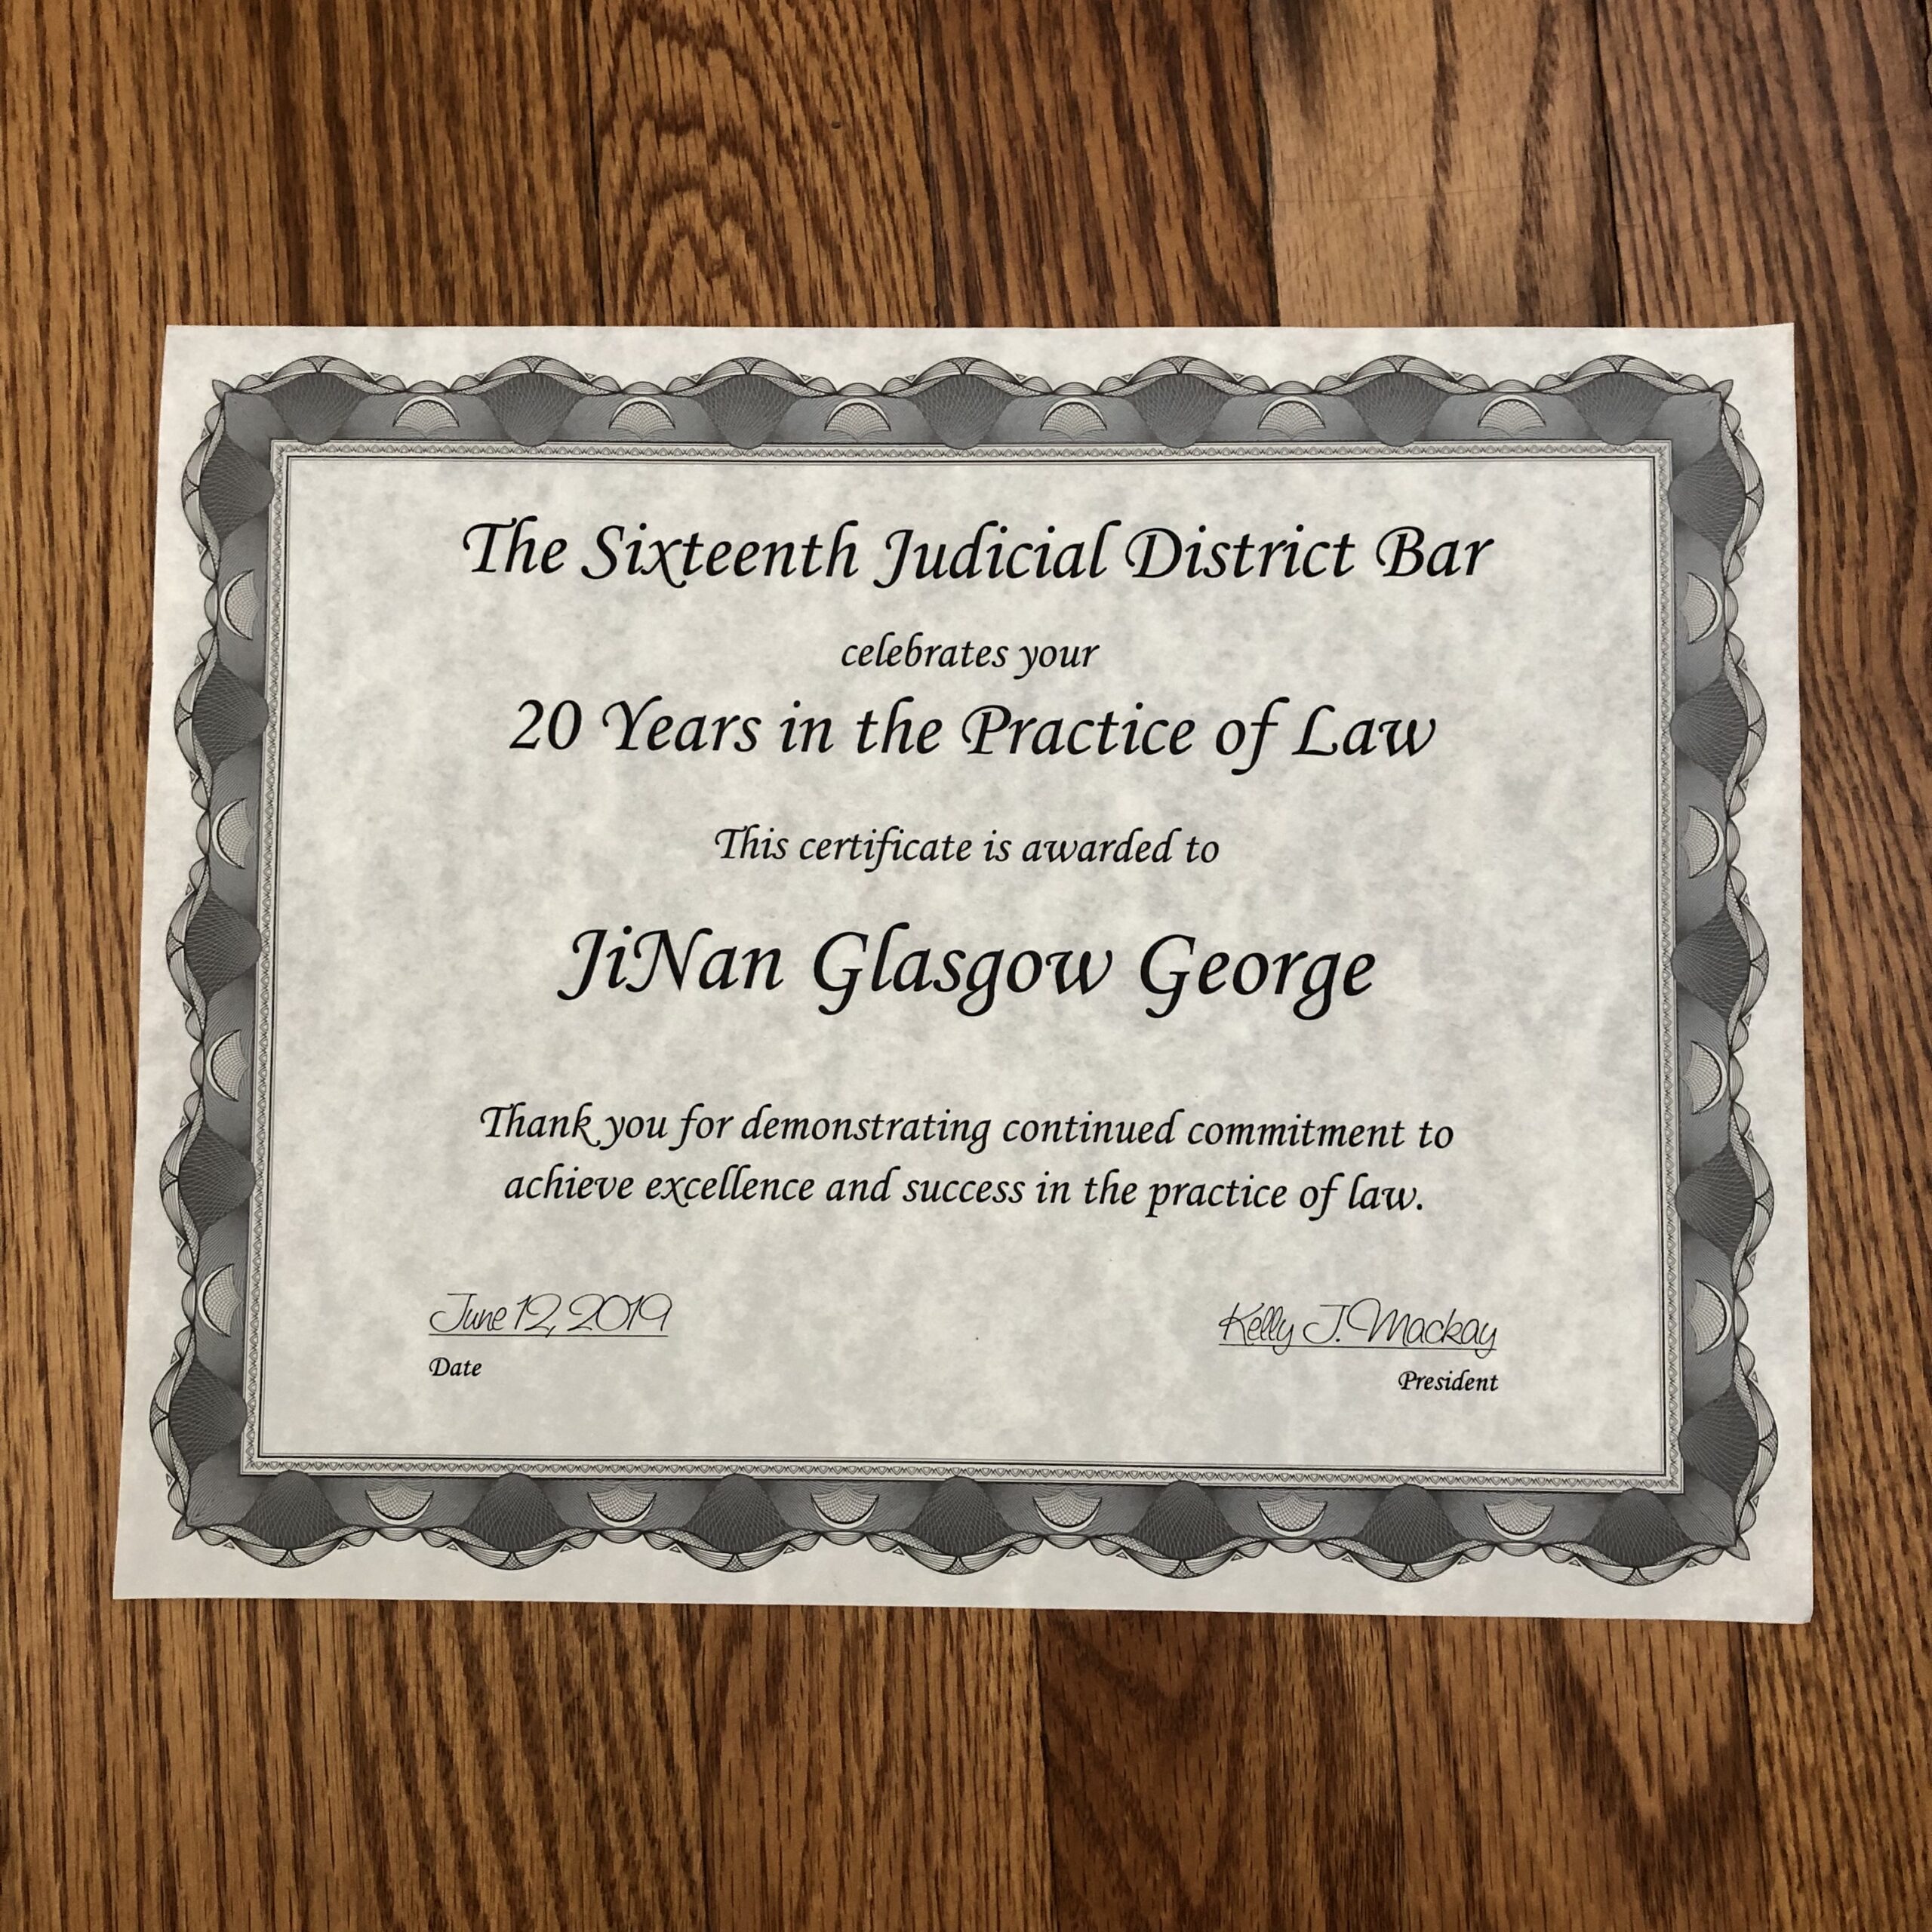 JiNan Glasgow George recognized for 20 years of practicing law by the Durham Bar